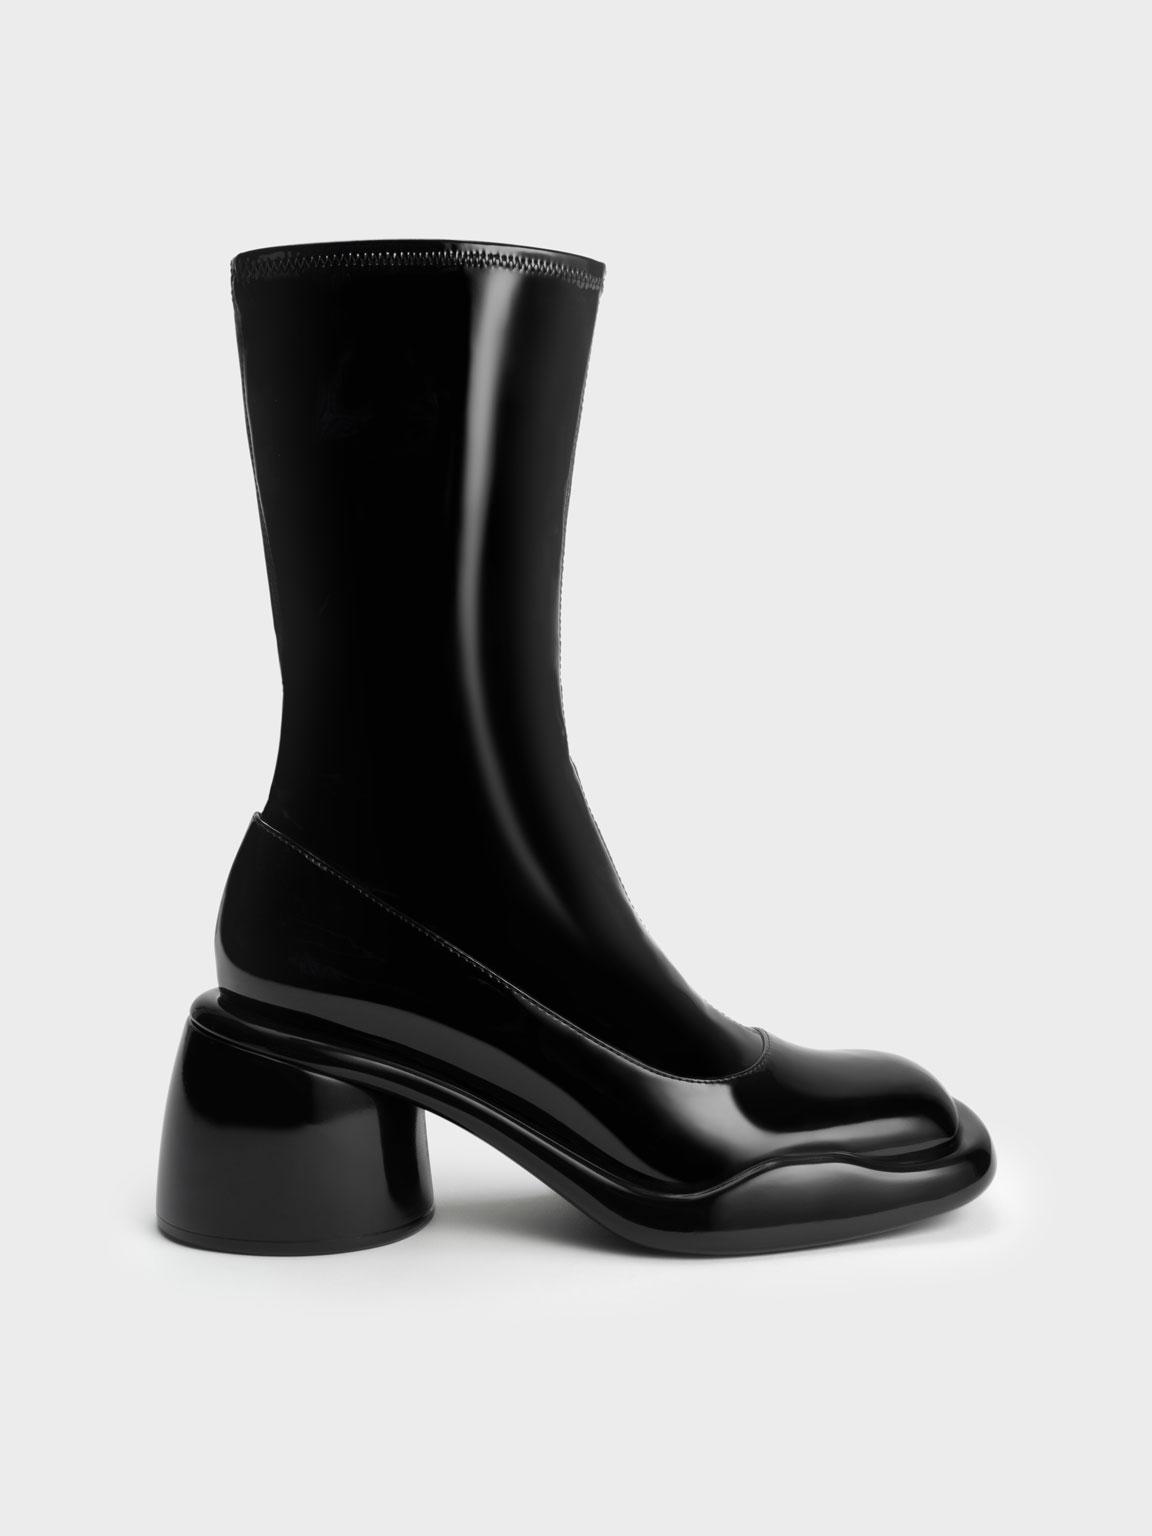 Charles & Keith Lula Patent Chunky Heel Calf Boots in Black | Lyst